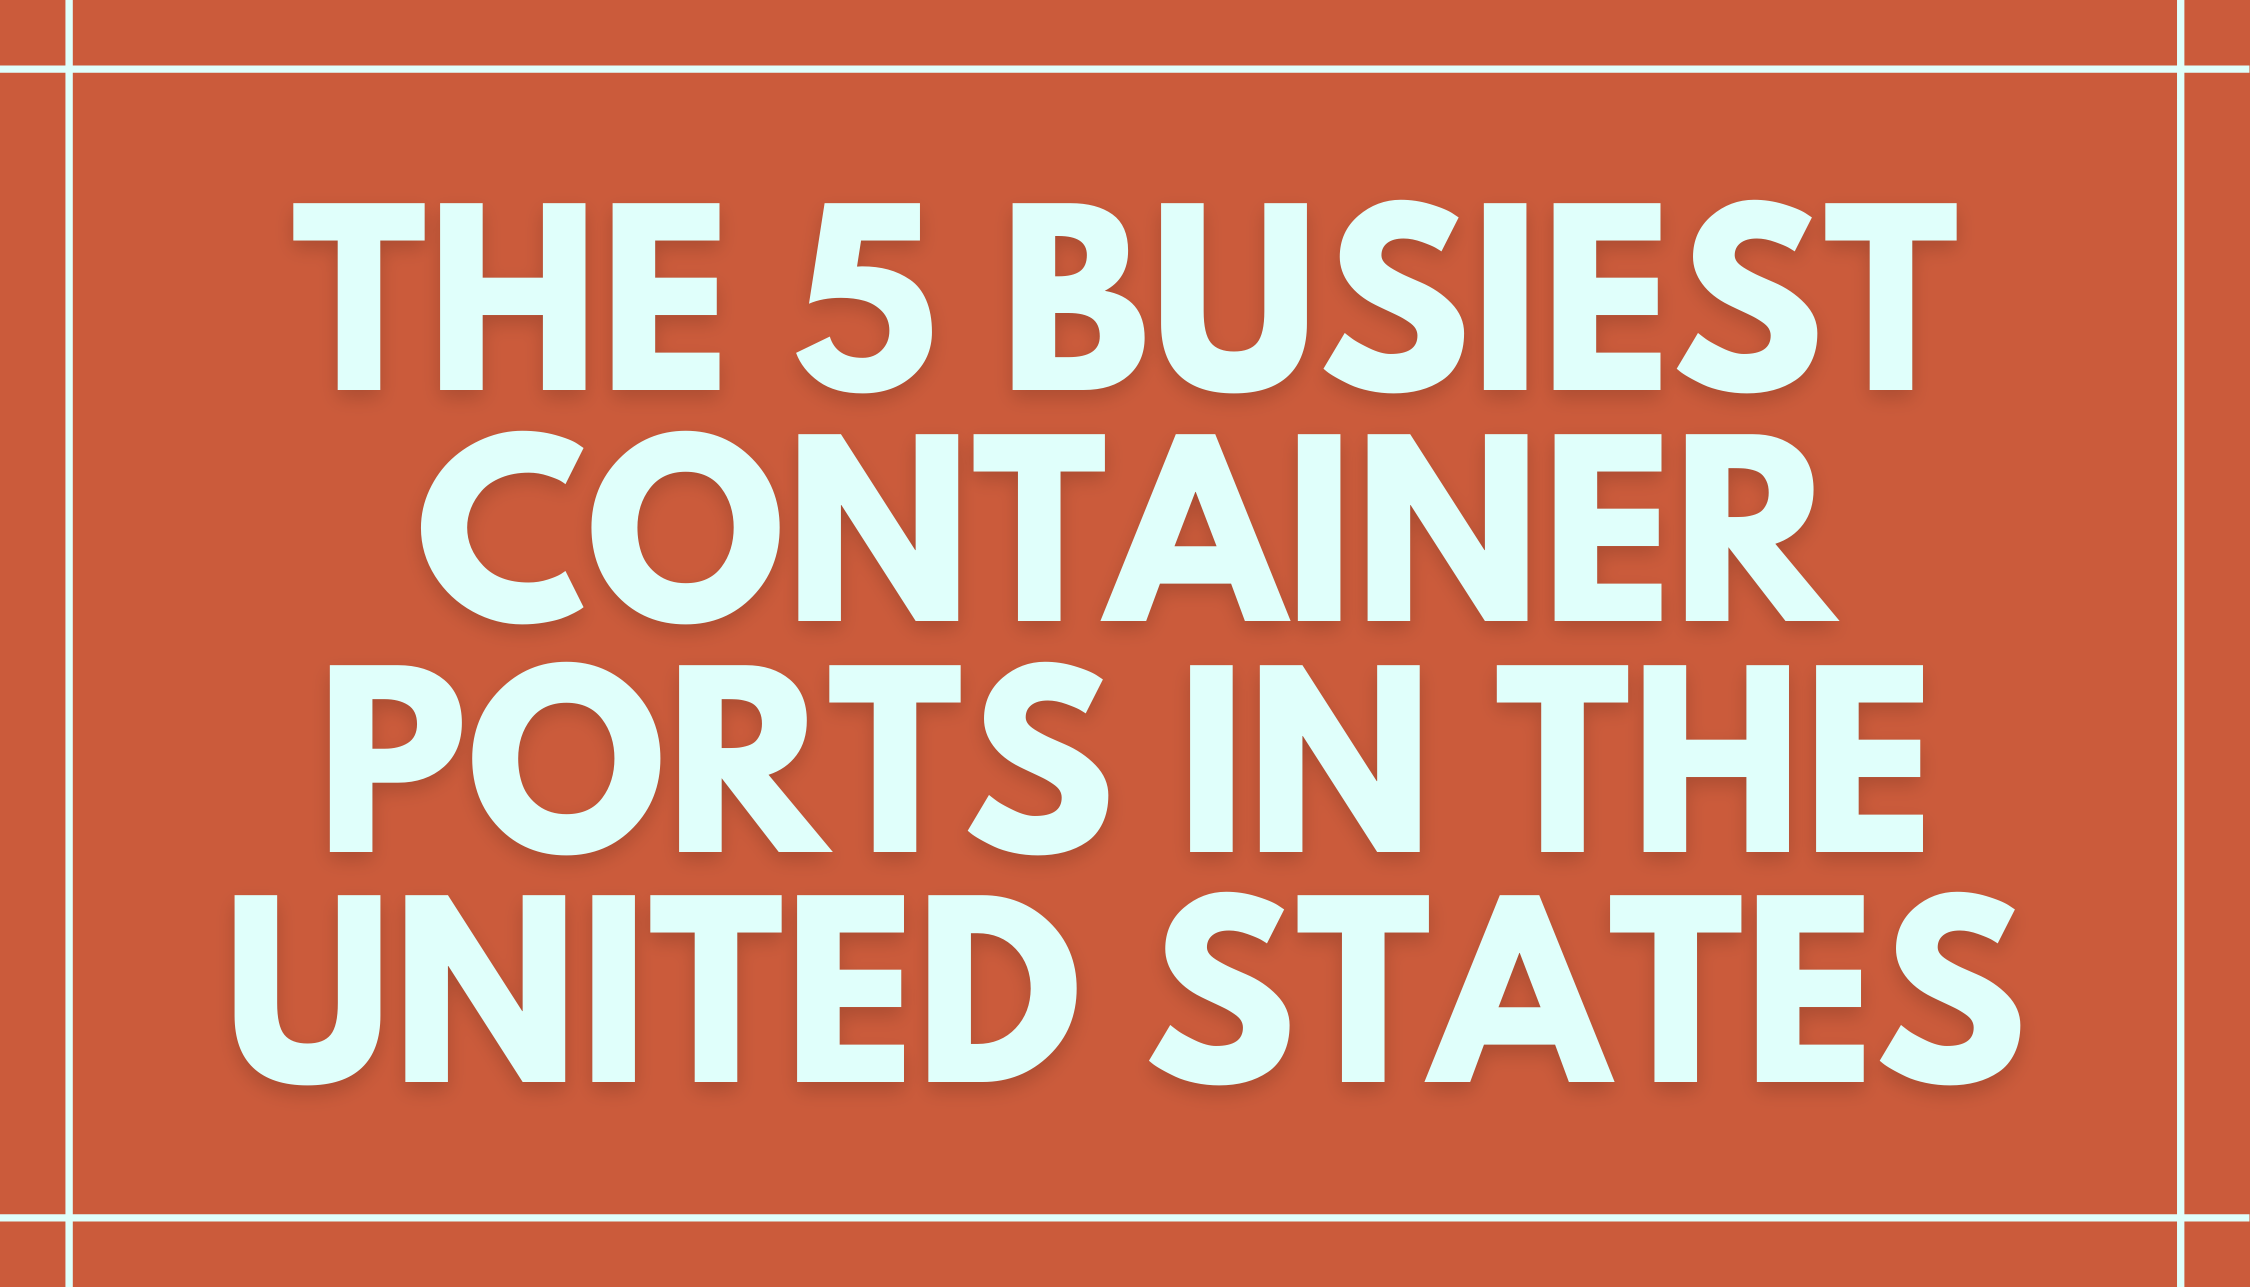 The 5 Busiest Container Ports in the United States